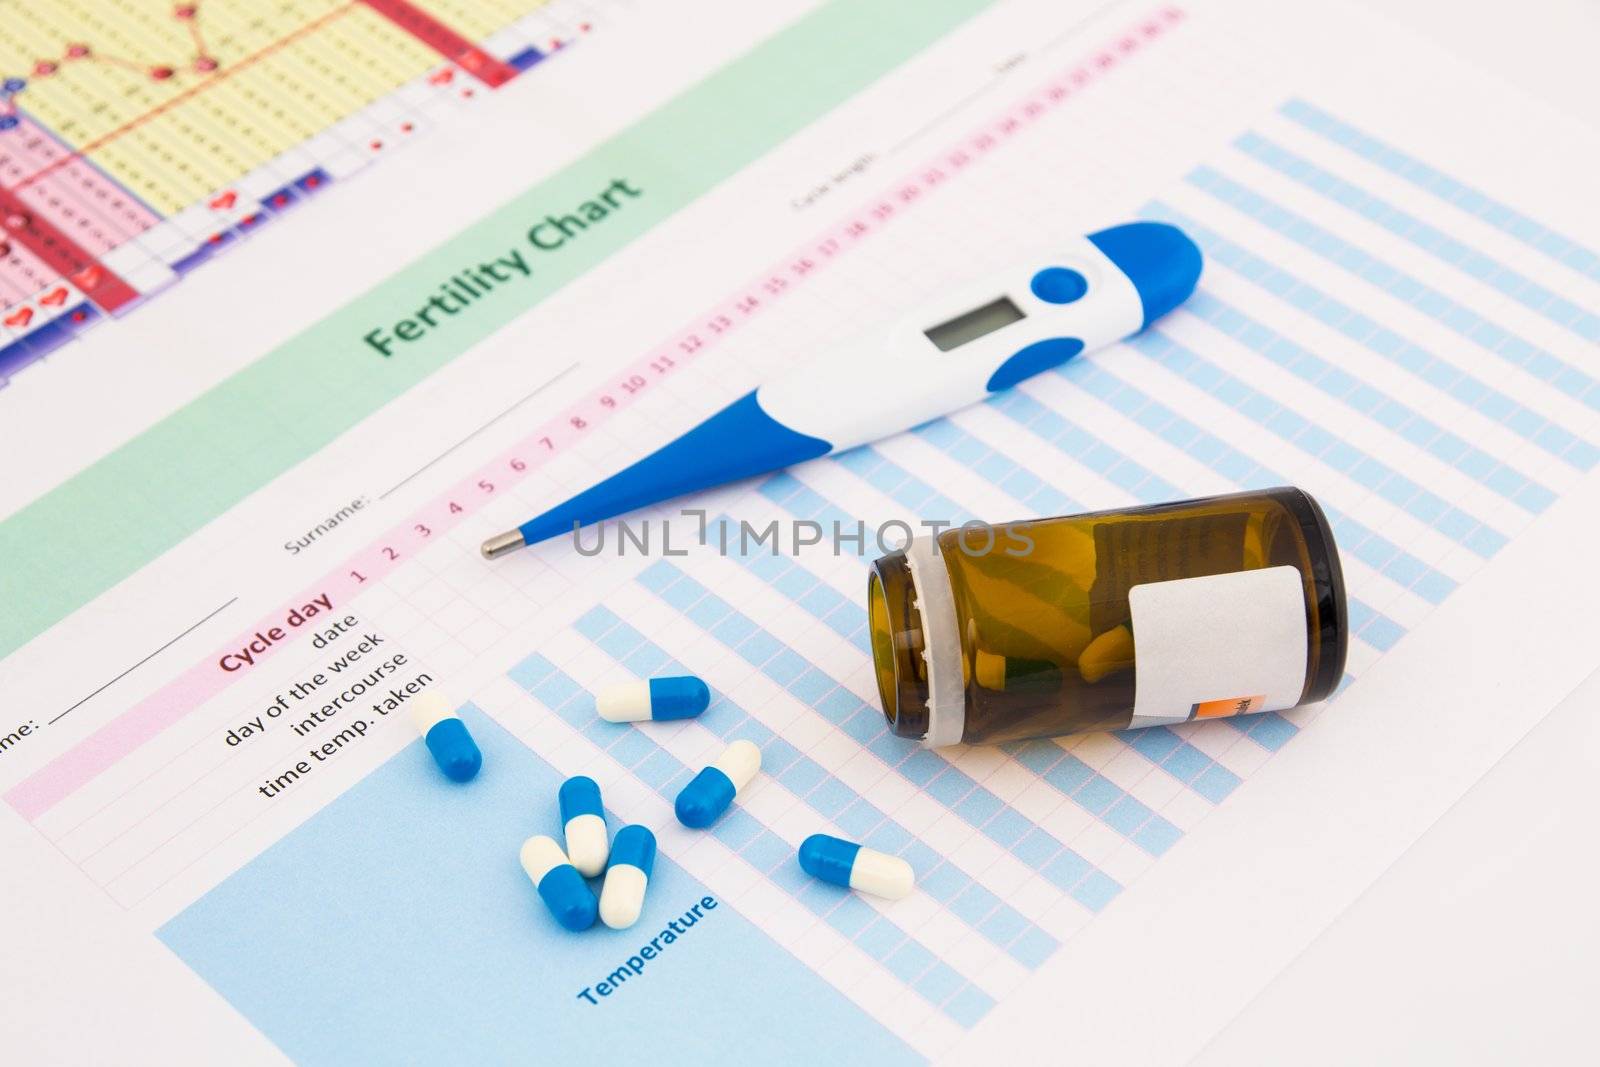 Electronic thermometer and pills on fertility chart by simpson33